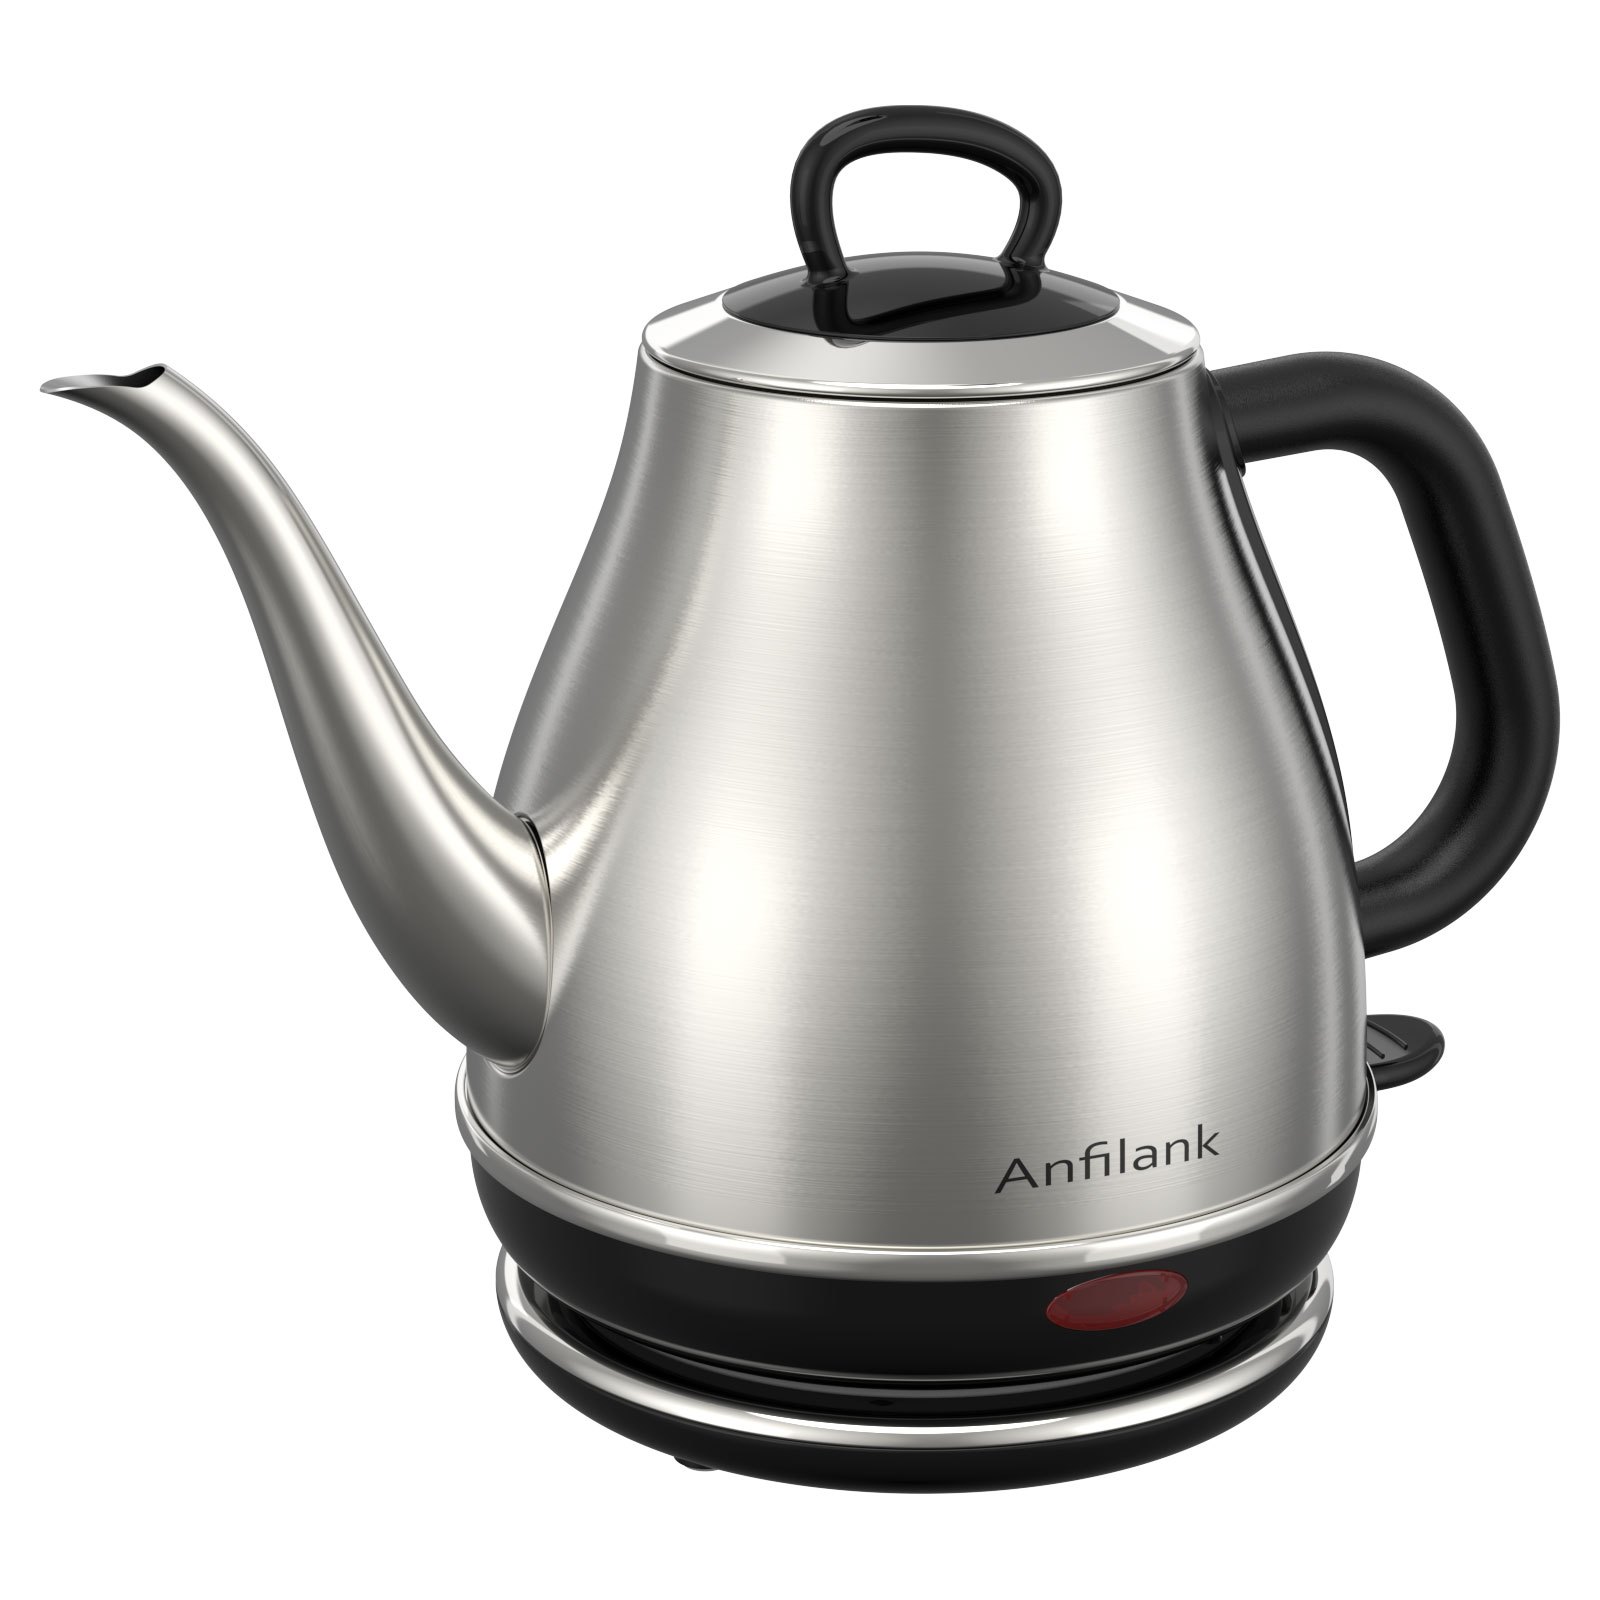 Bsigo Gooseneck Electric Kettle with Thermometer, 100% Stainless Steel for  Pour-over Coffee & Tea Kettle, BPA Free, Auto Shut off Anti-dry Protection